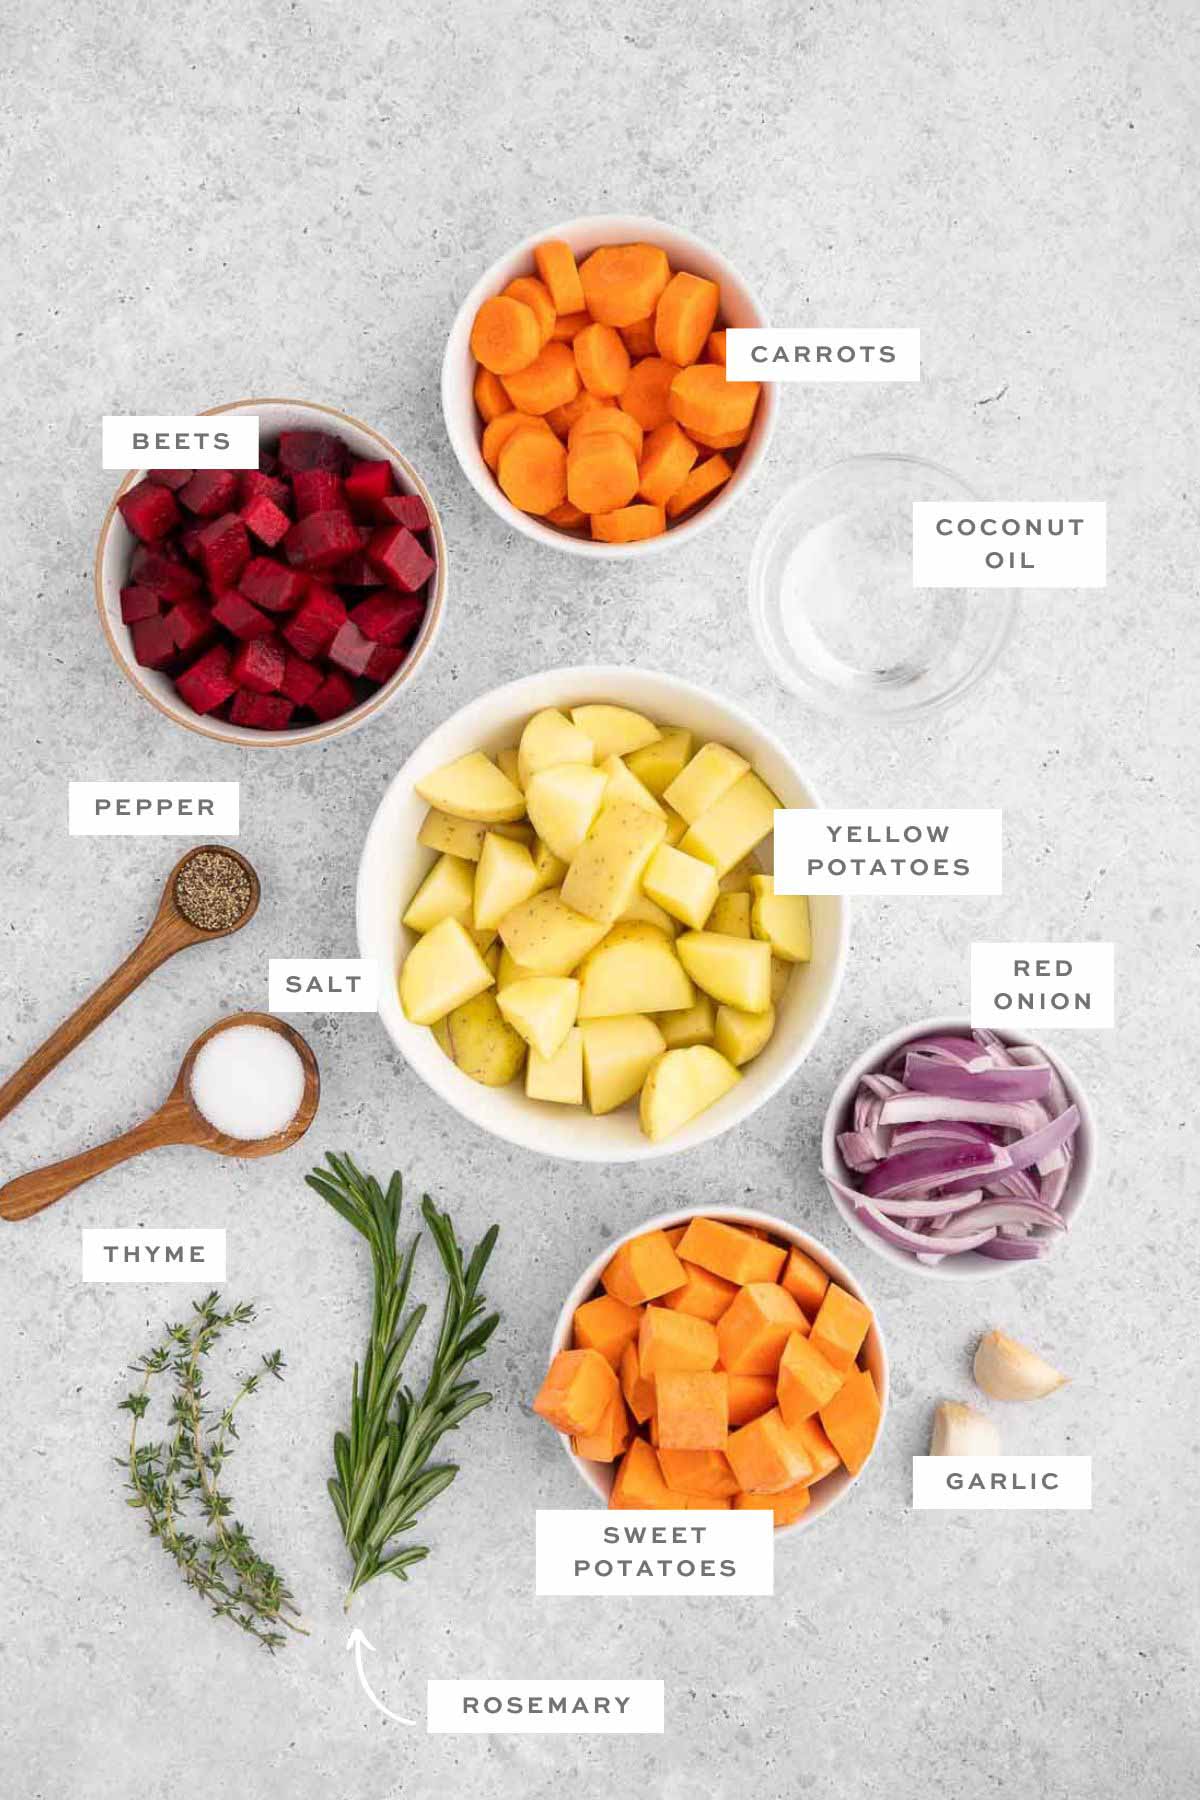 Key ingredients for roasted root vegetables with labels.